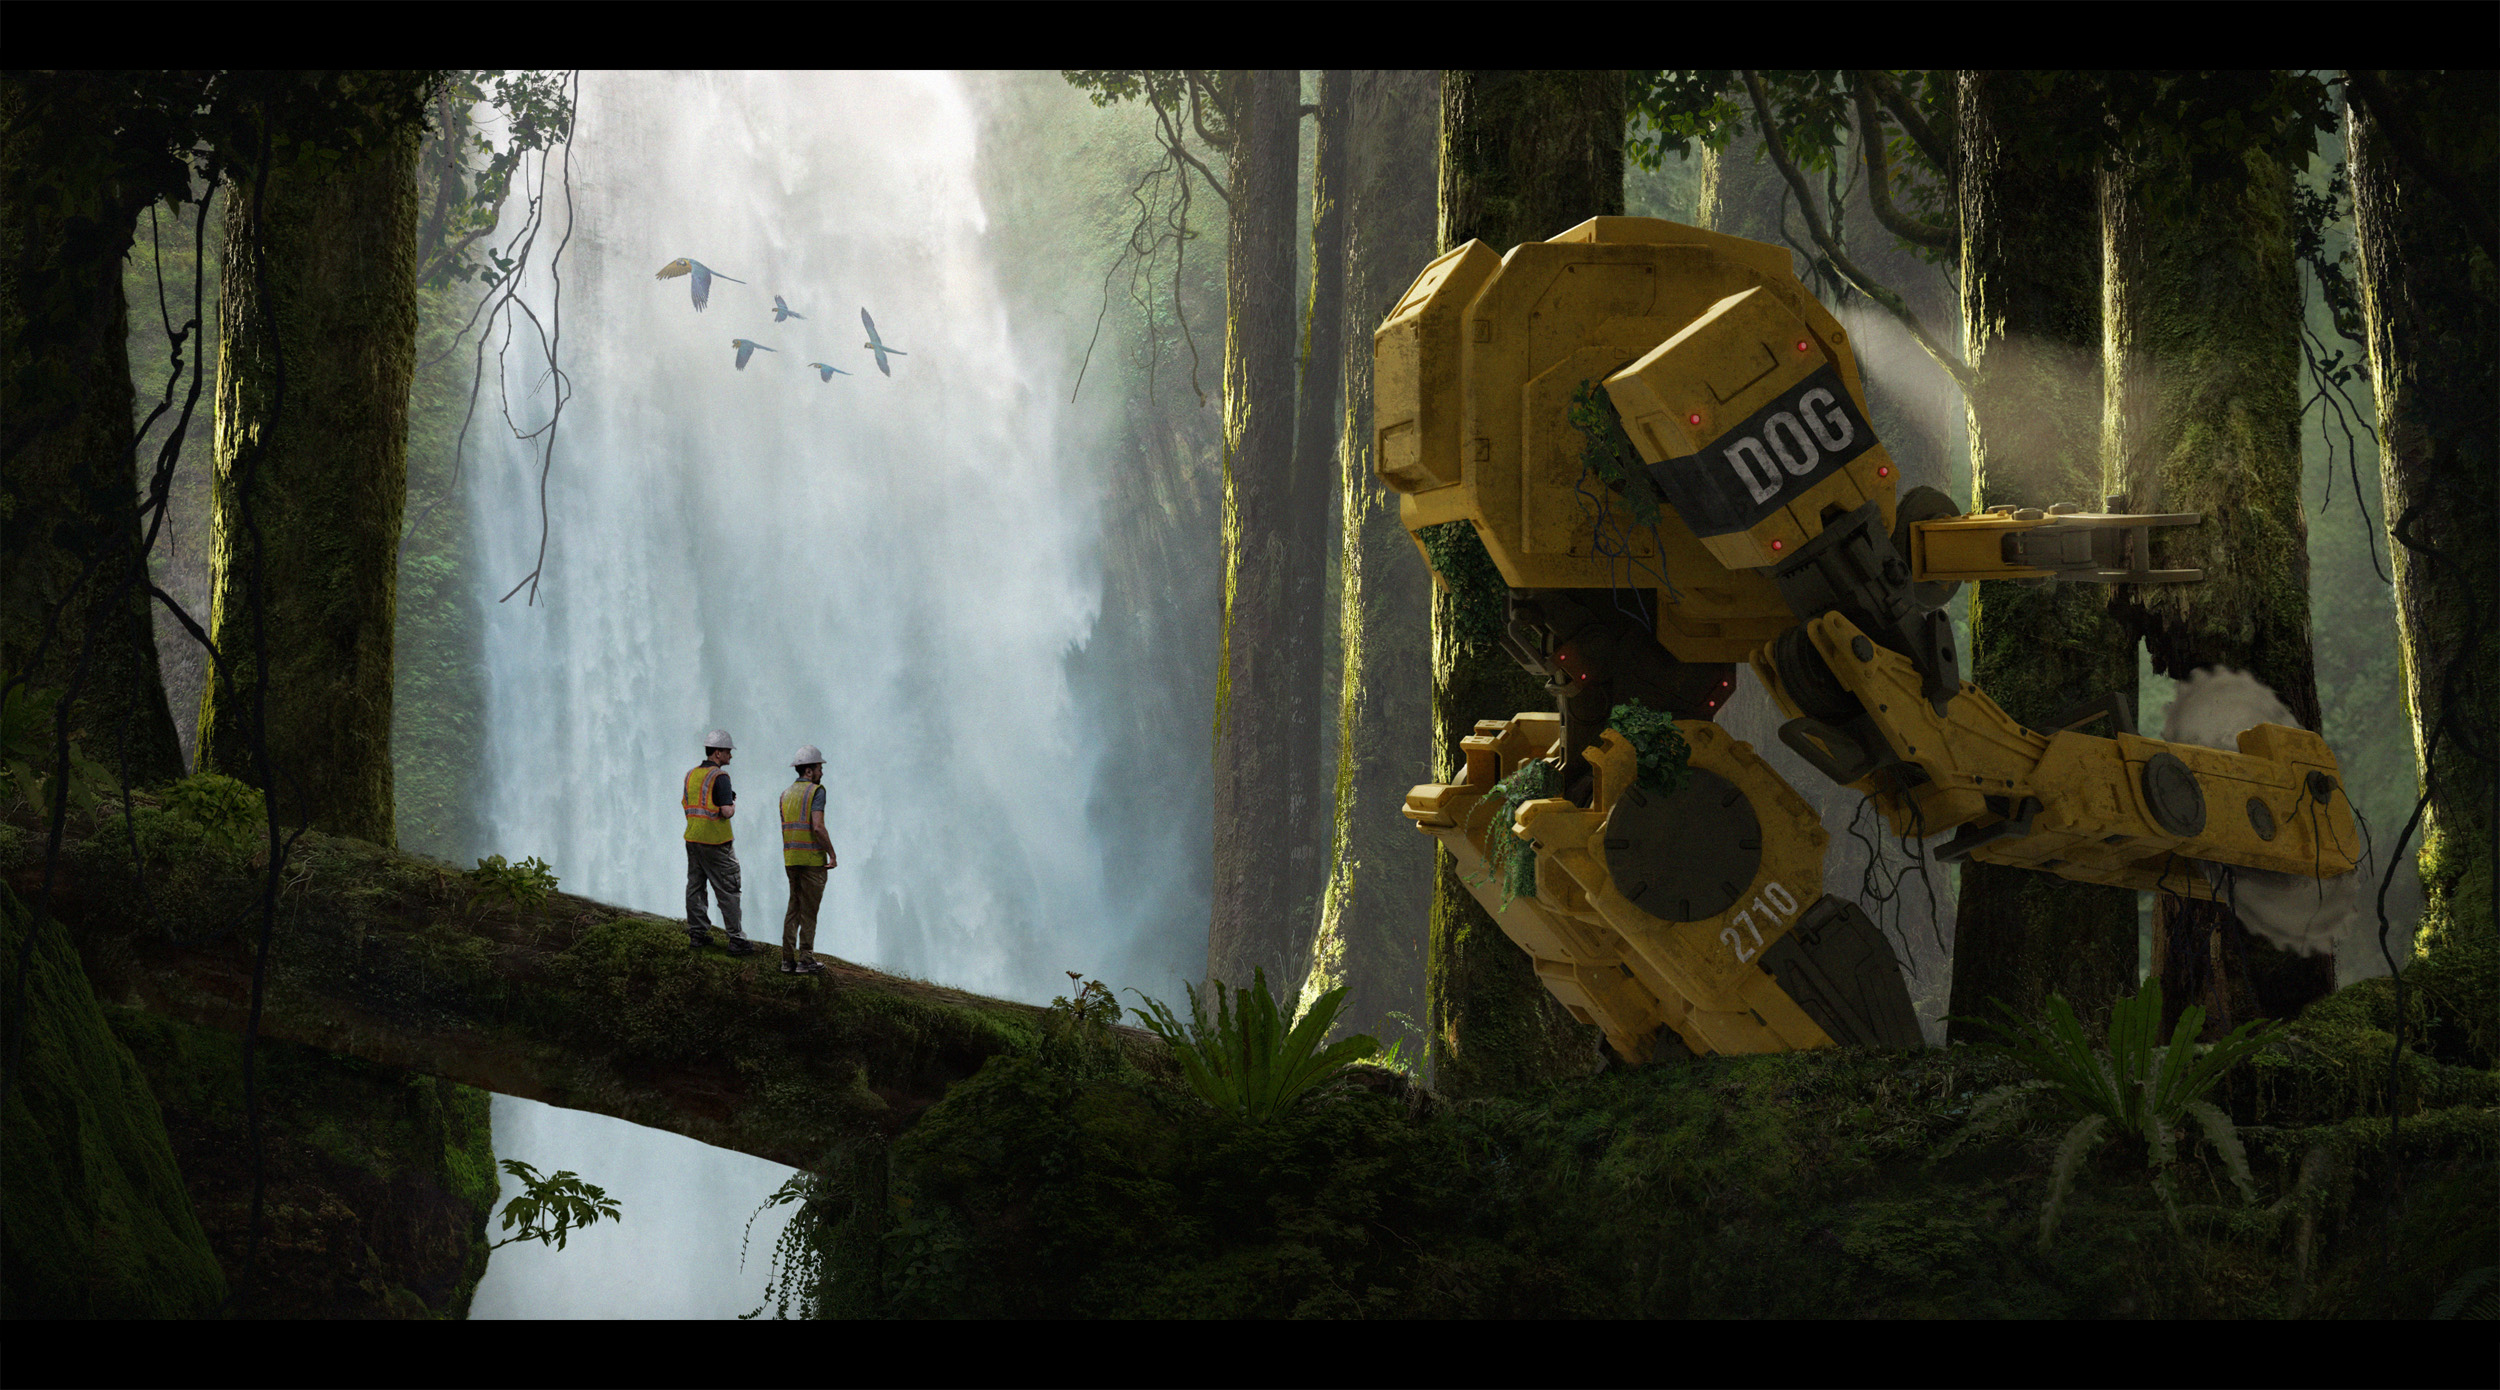 Digital illustration of two industrial workers observing one of their mechs cutting down an overgrown tree in a rainforest.